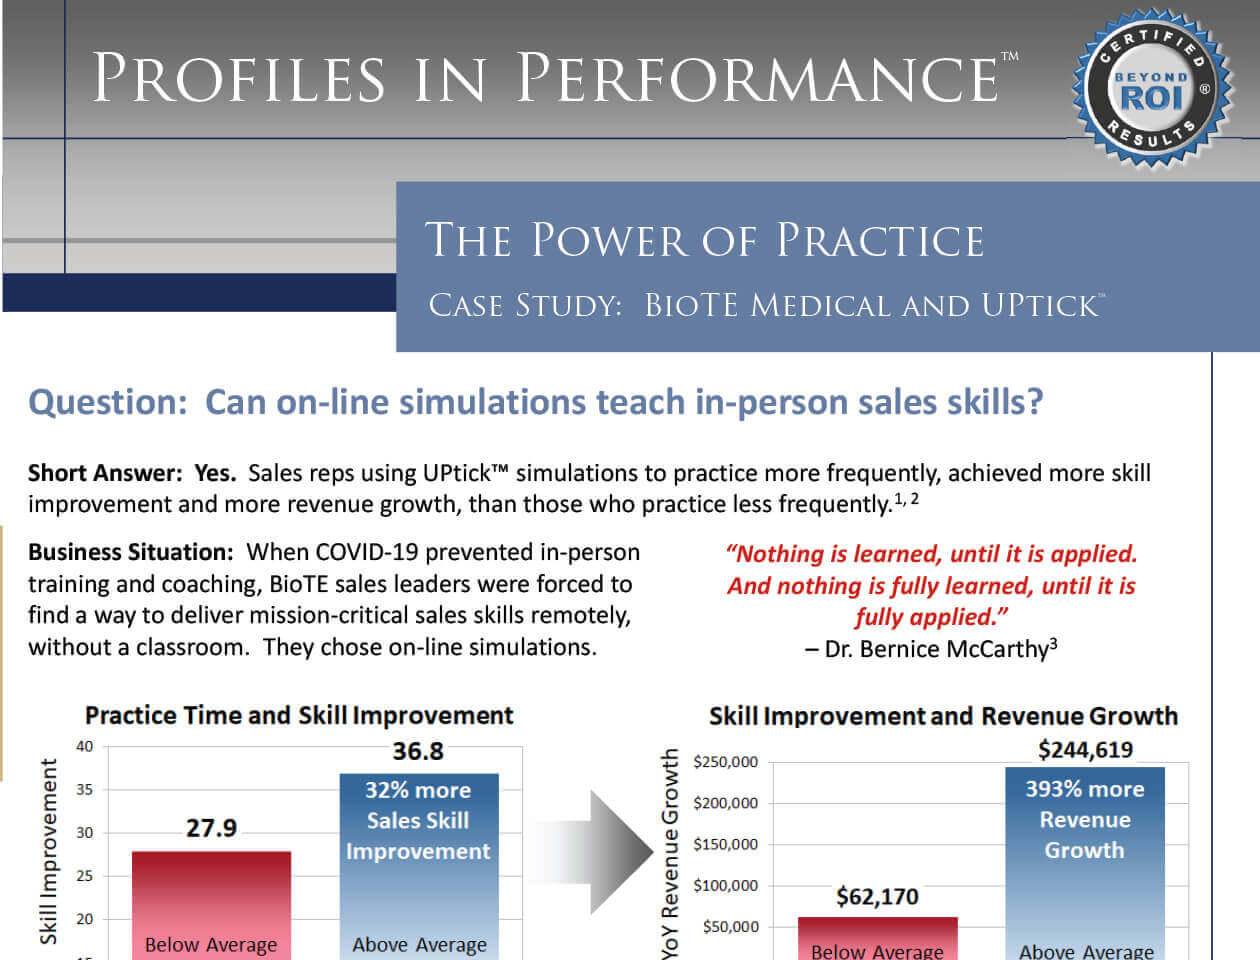 Profiles in Performance – The Power of Practice 2.0